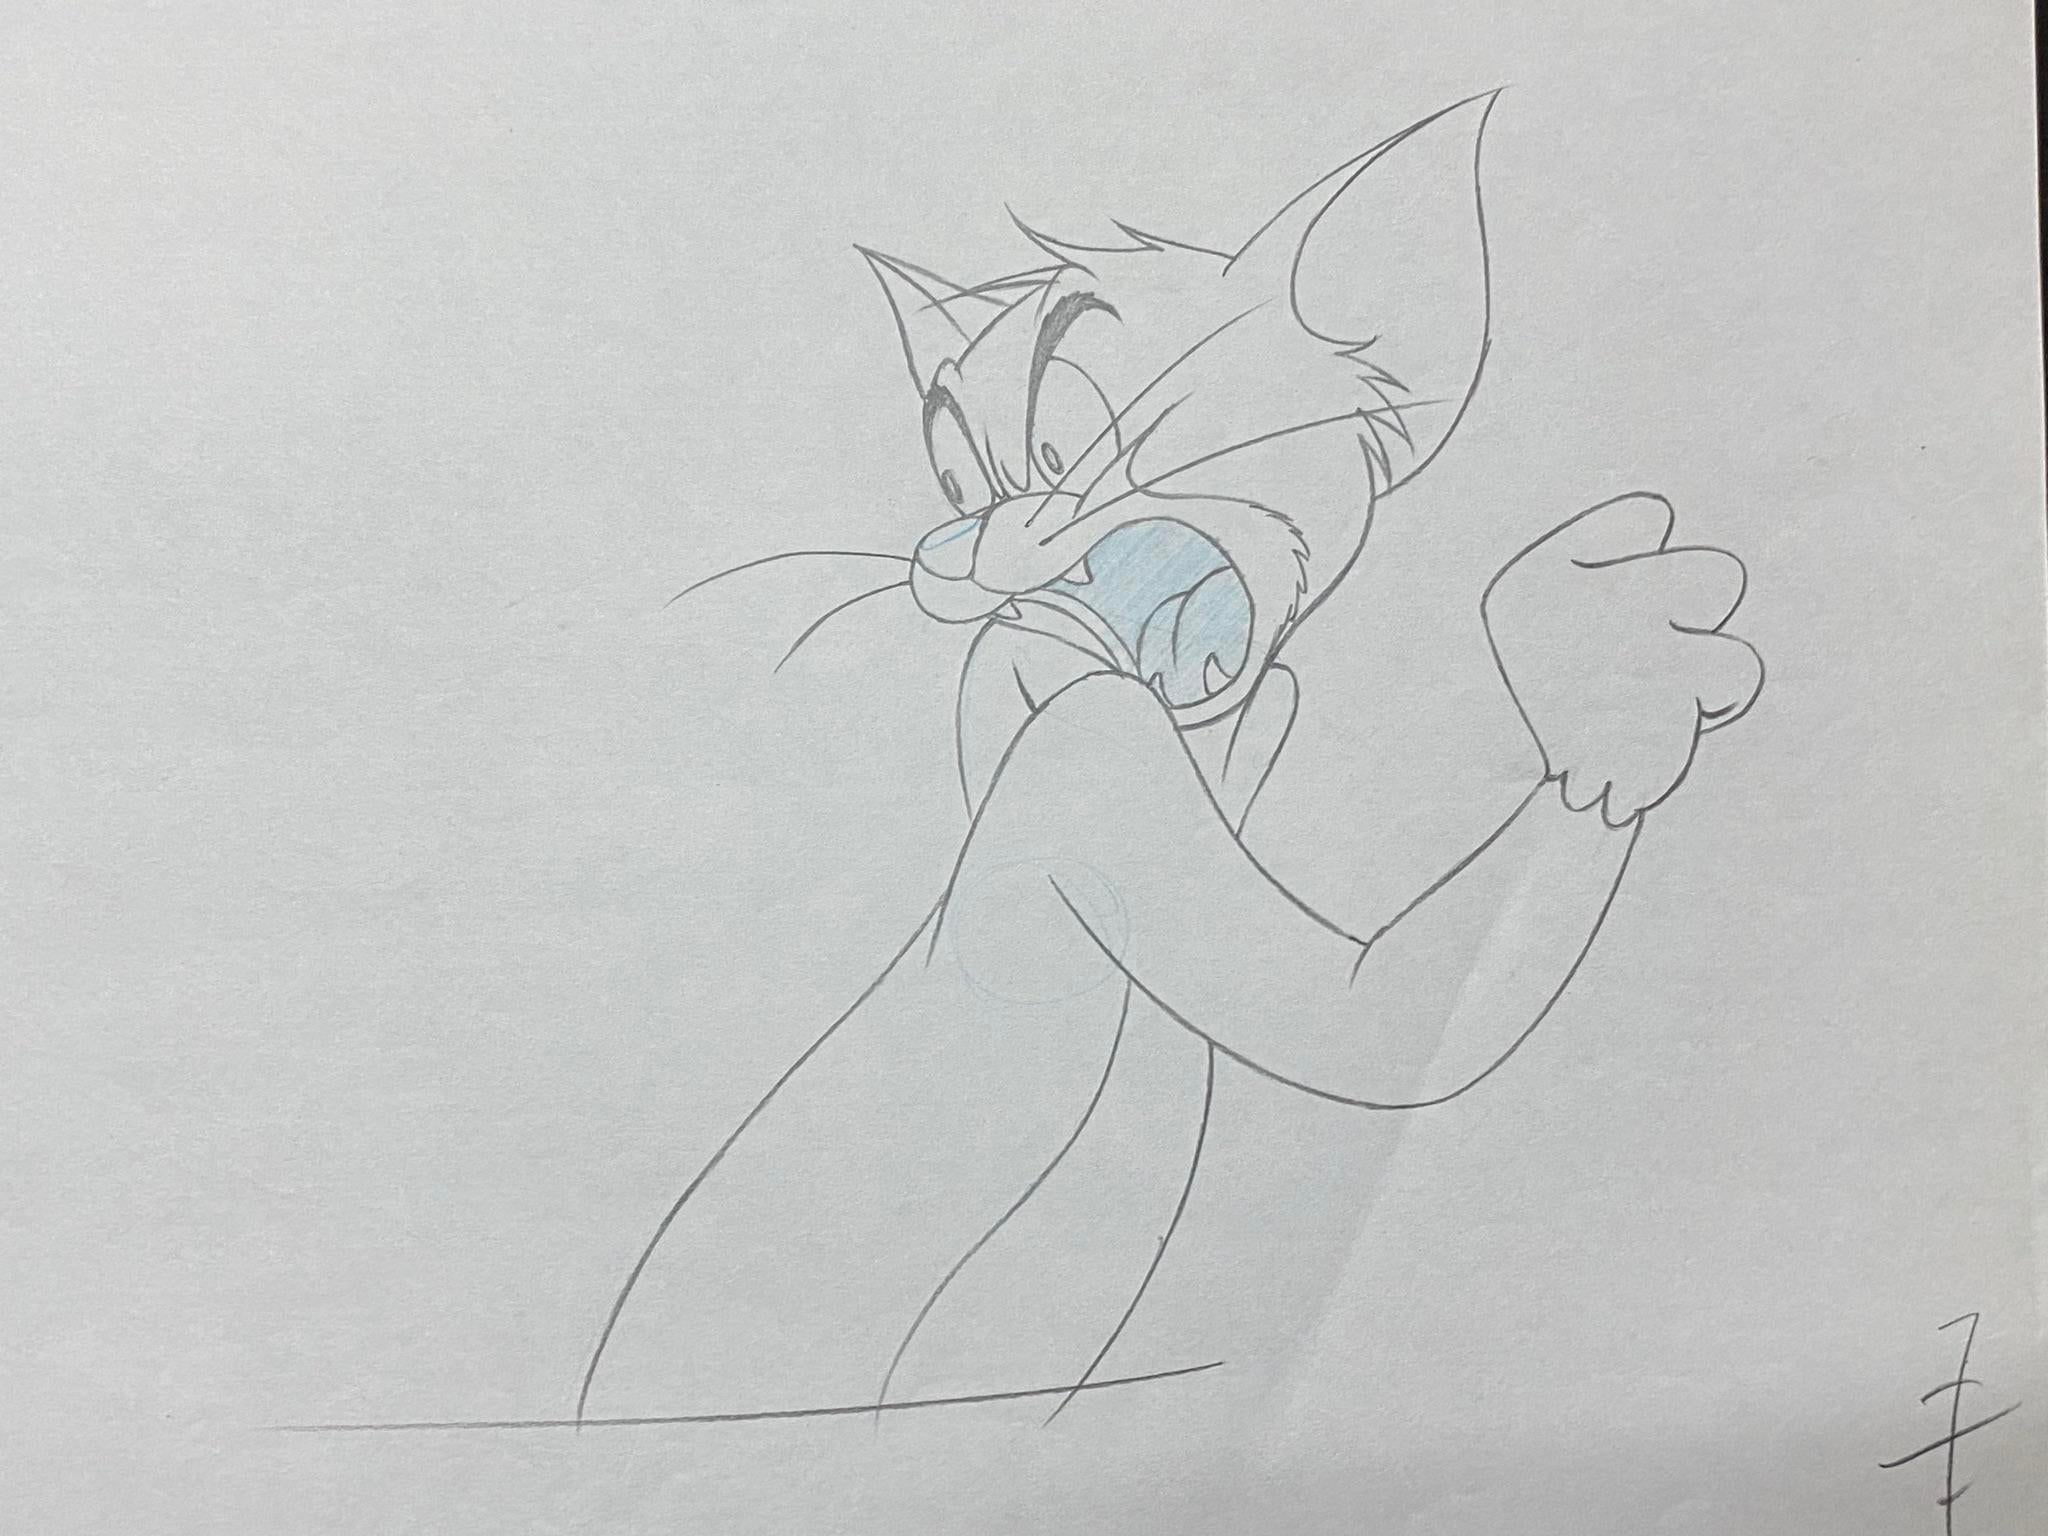 Tom Y Jerry drawing free image download